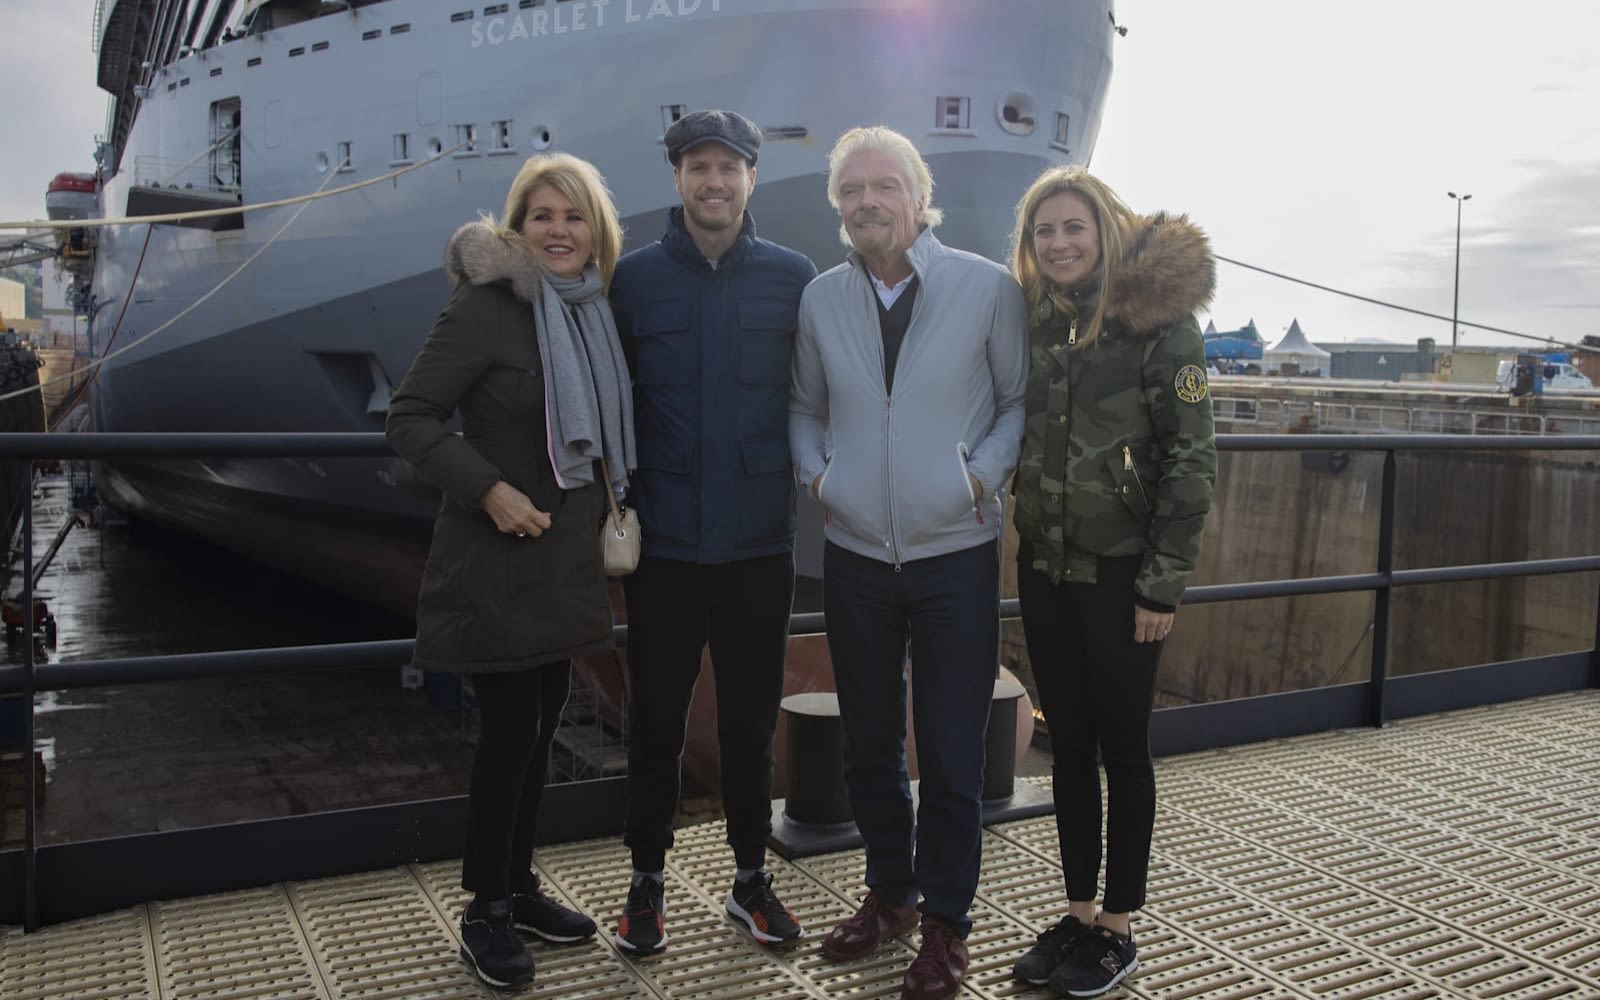 Richard Branson, wife Joan and children Sam and Holly stand on the dock in front of Virgin Voyages' ship Scarlet Lady